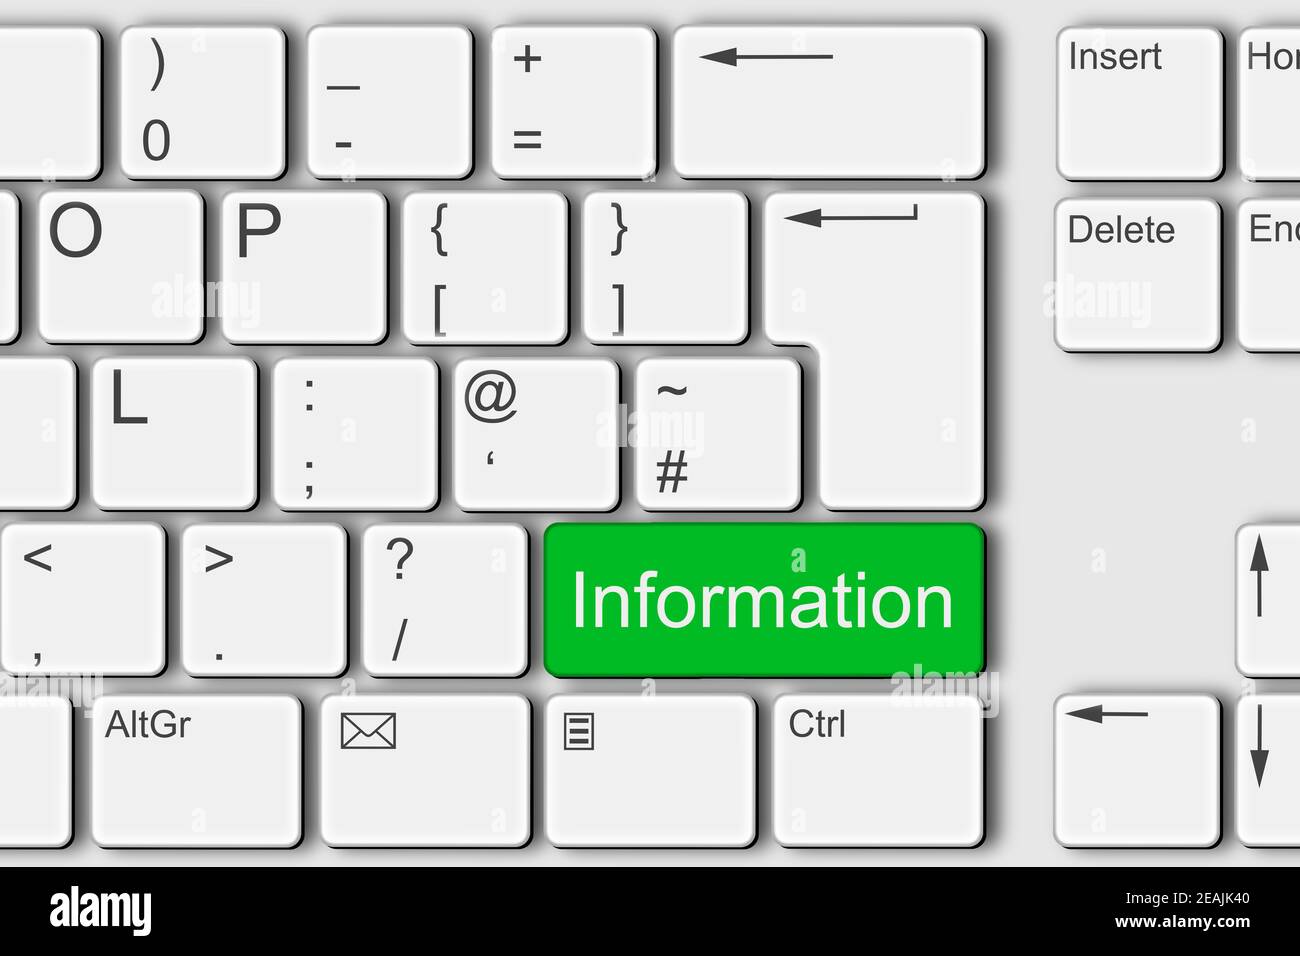 Information concept PC computer keyboard 3d illustration Stock Photo